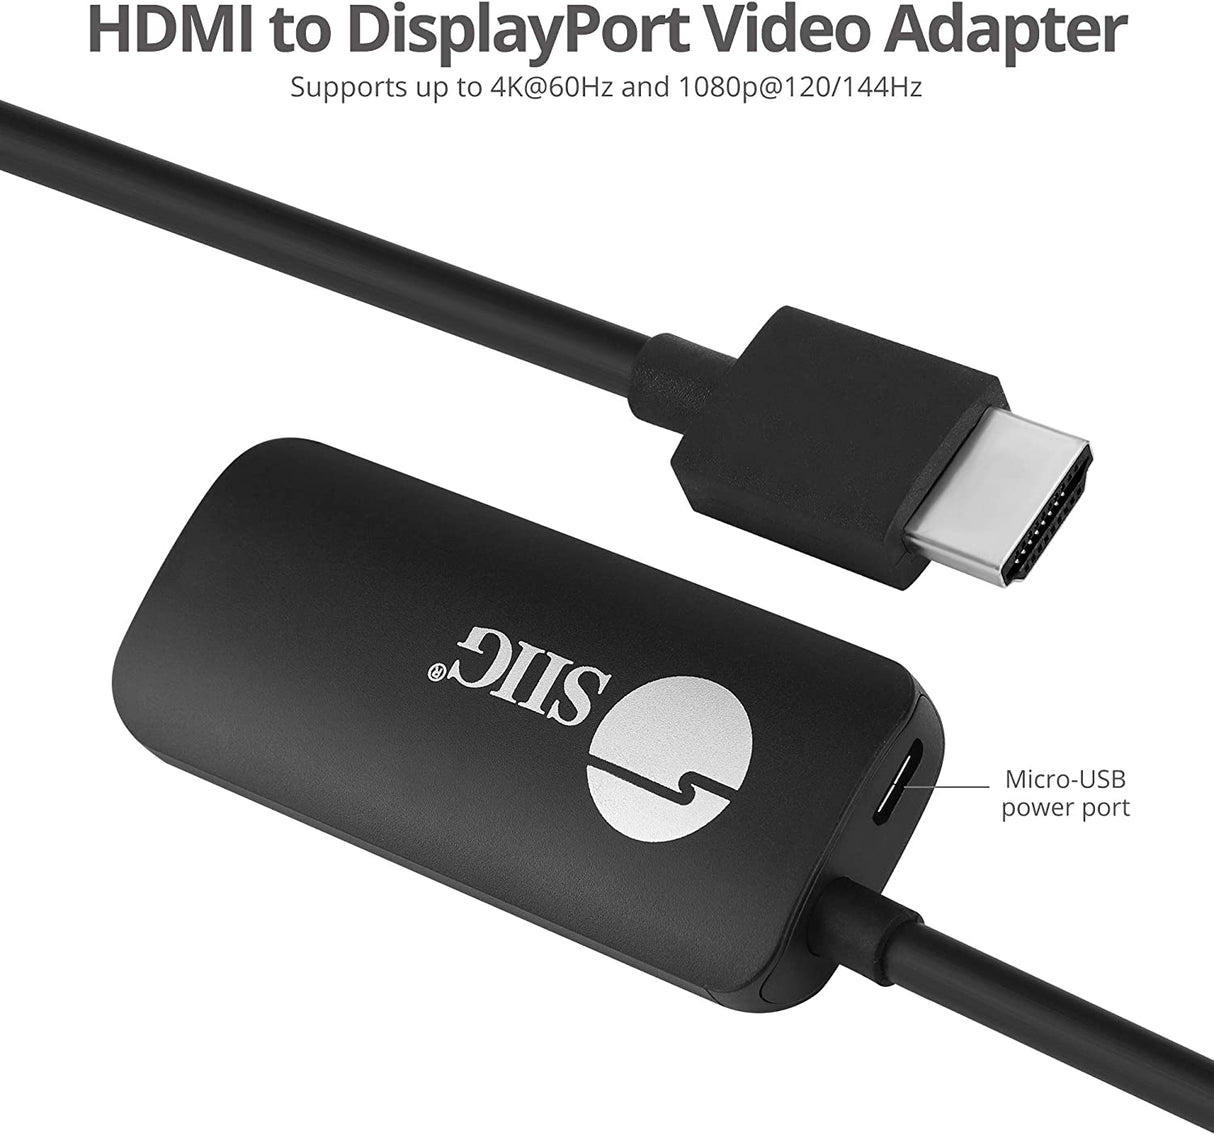 SIIG HDMI to DisplayPort 1.2 4K60Hz Converter Adapter, for HDMI Source to DP Display, 4K60Hz/1080p144Hz, HDR, HDCP 2.2, Stereo Audio, Portable USB-Powered Plug and Play (CB-H21811-S1)